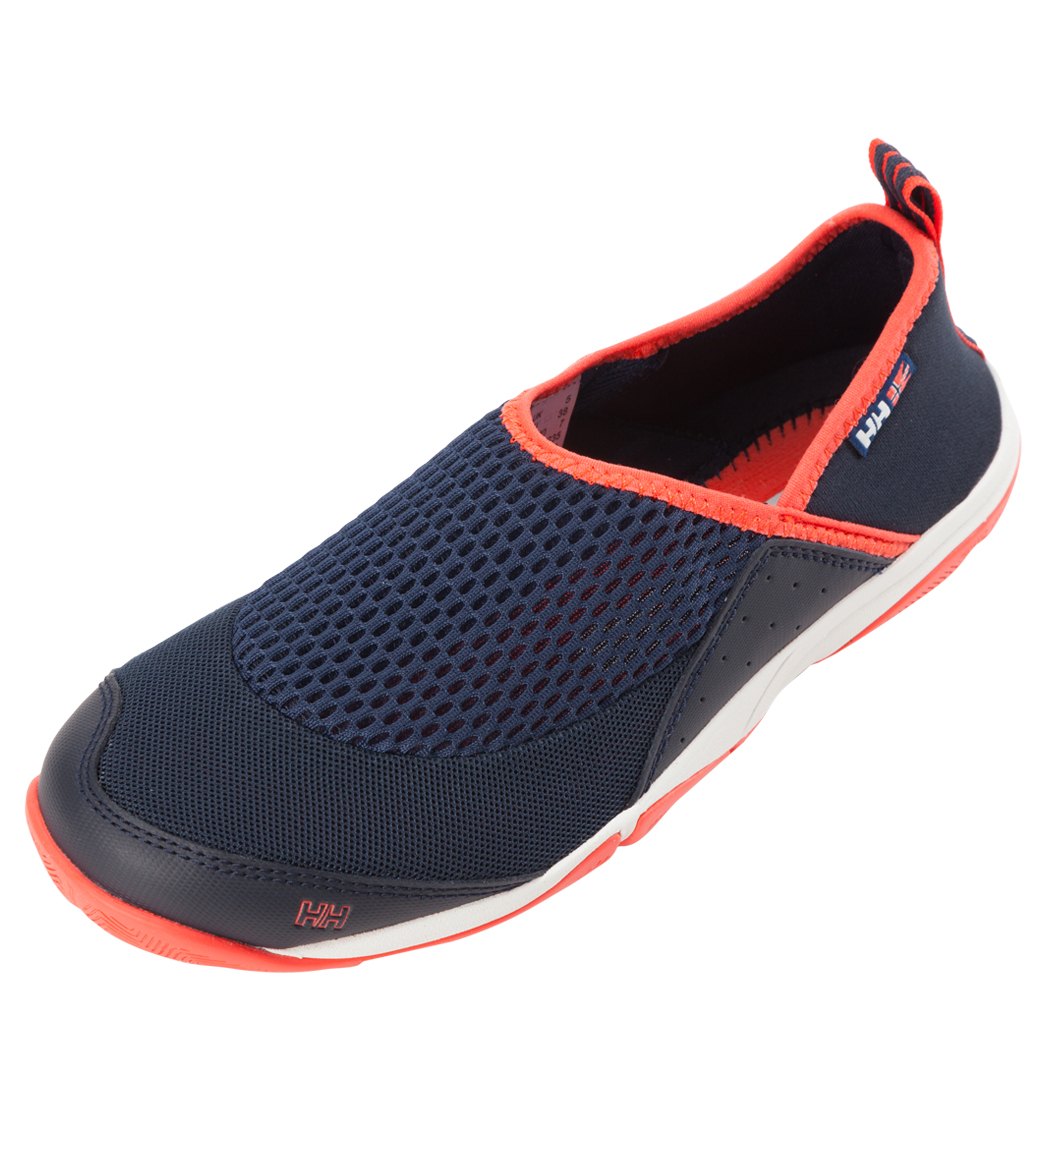 Helly Hansen Women's Watermoc 2 Water Shoes at SwimOutlet.com